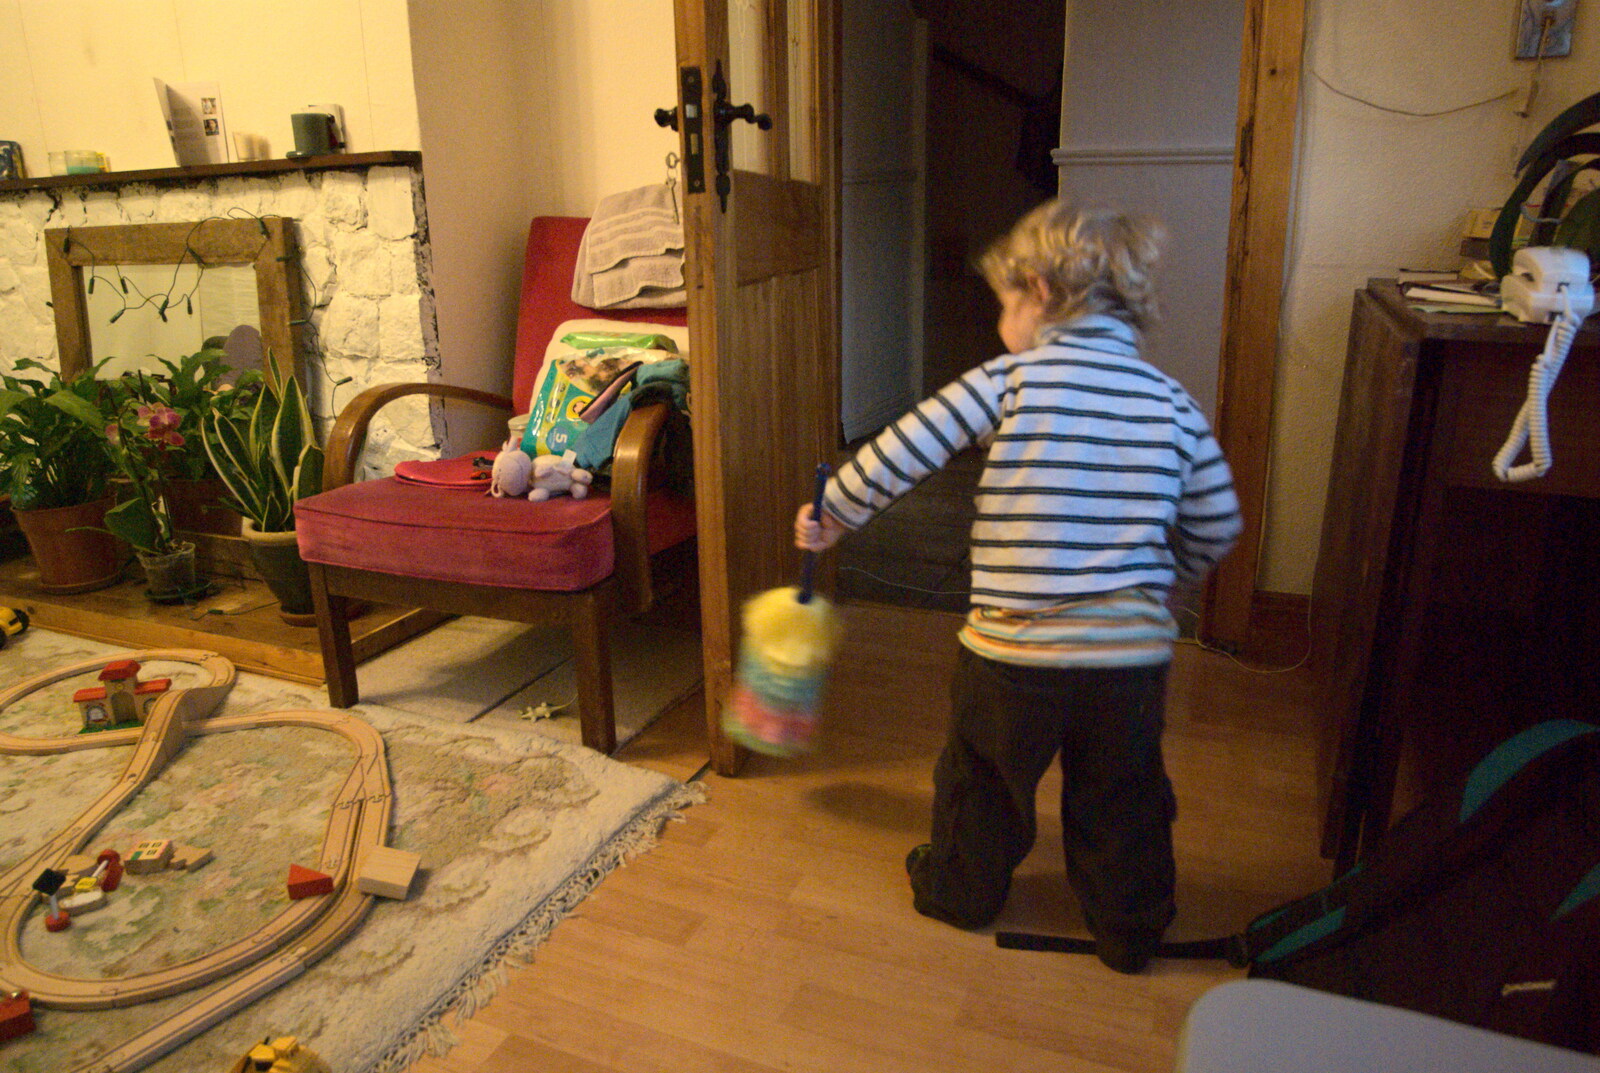 Fred waves a duster around from A Week in Monkstown, County Dublin, Ireland - 1st March 2011